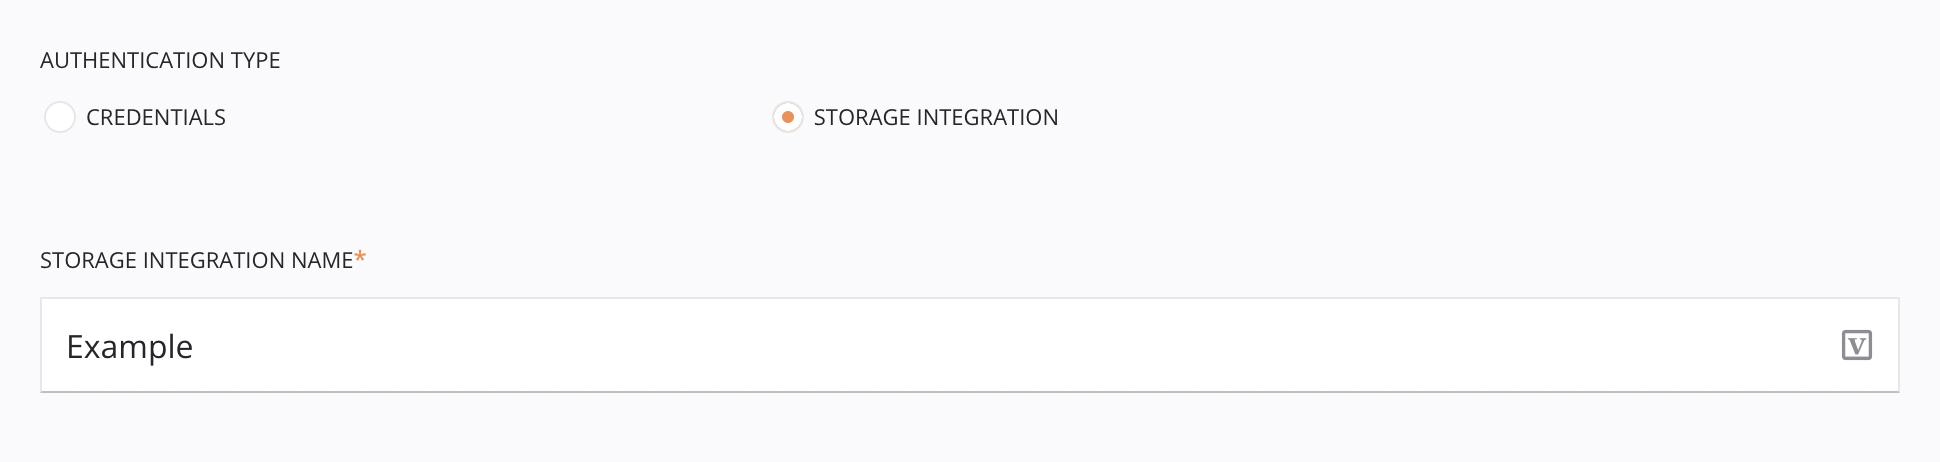 Snowflake Insert Activity Configuration Step 2 Microsoft Azure Stage File Approach Storage Integration